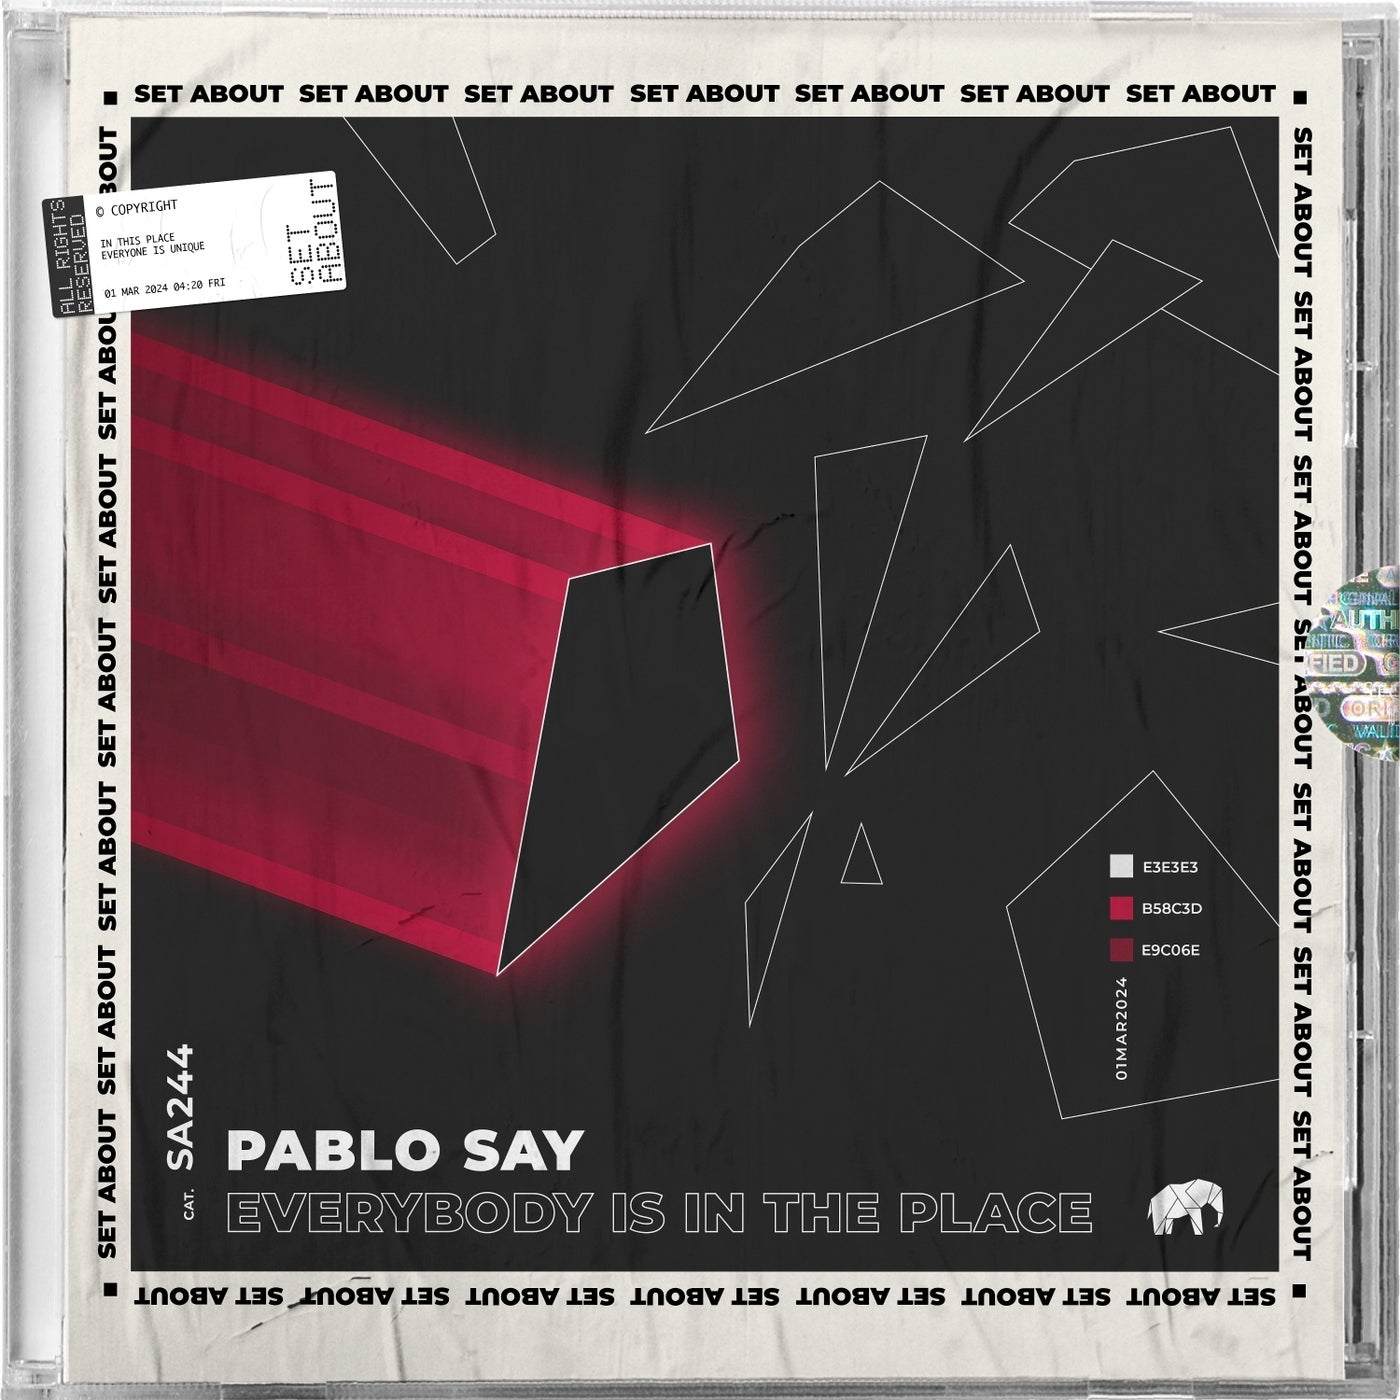 image cover: Pablo Say - Everybody Is in the Place on Set About